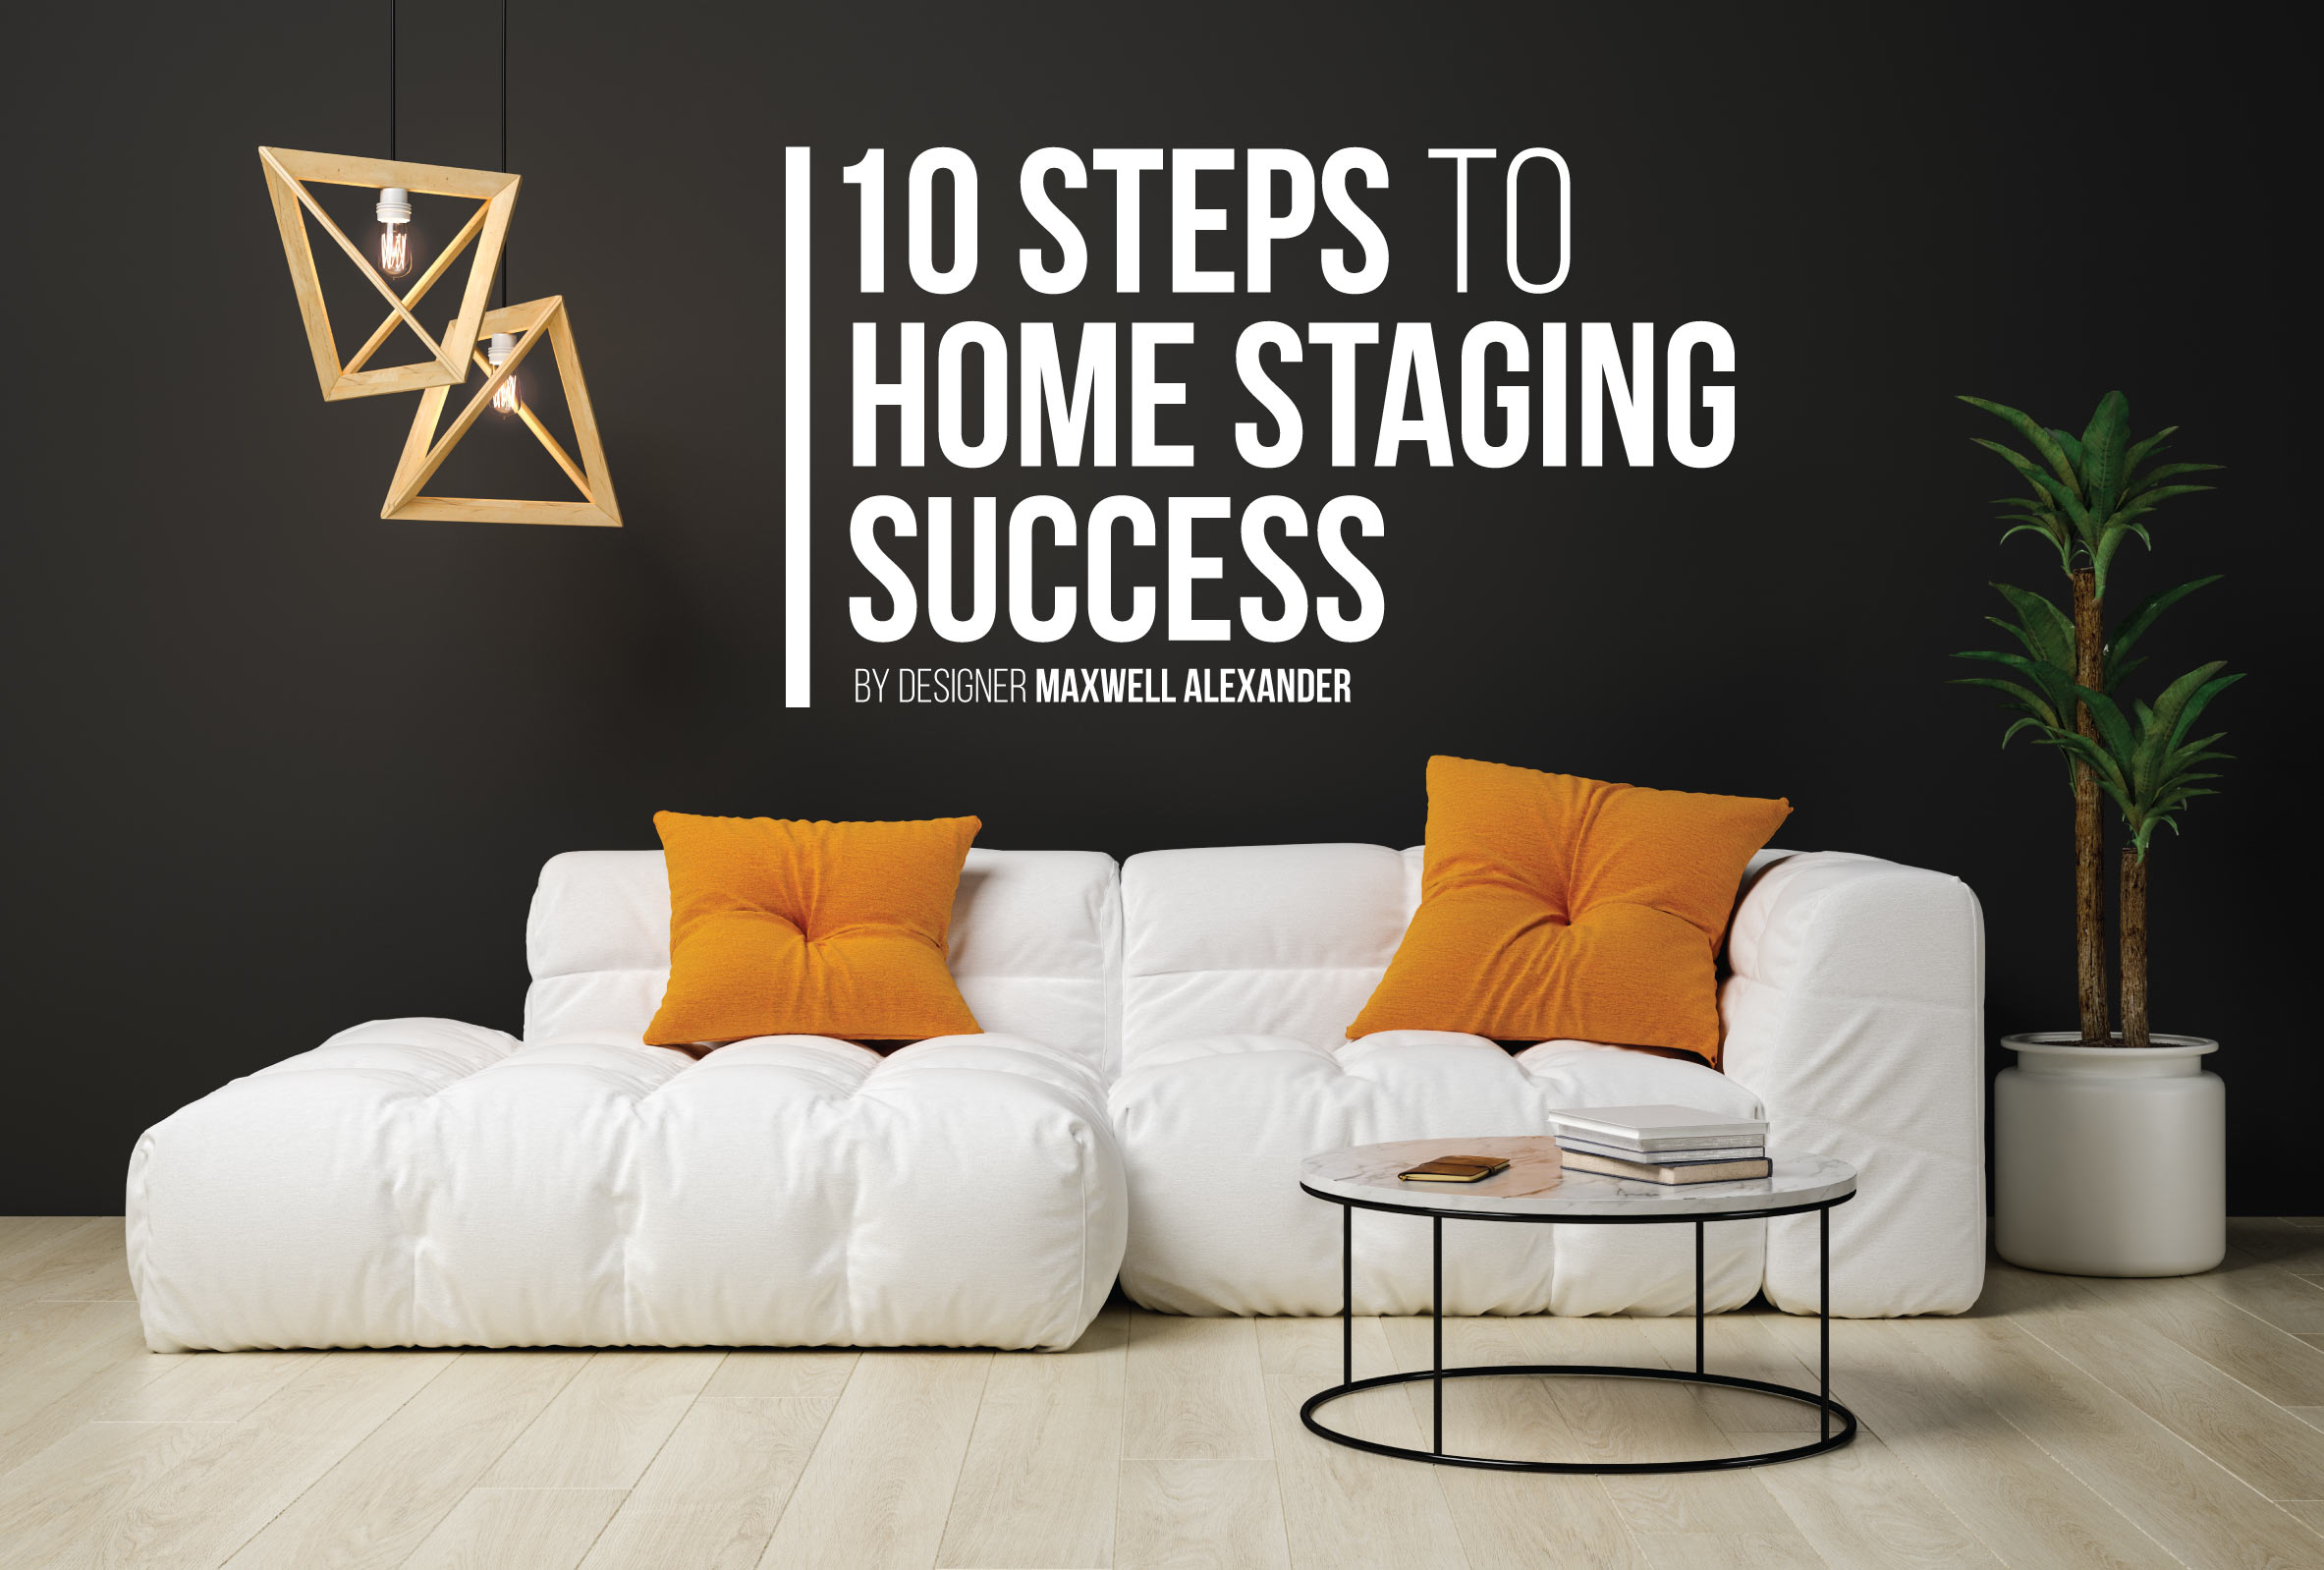 10 Steps to Home Staging Success by Designer Maxwell Alexander